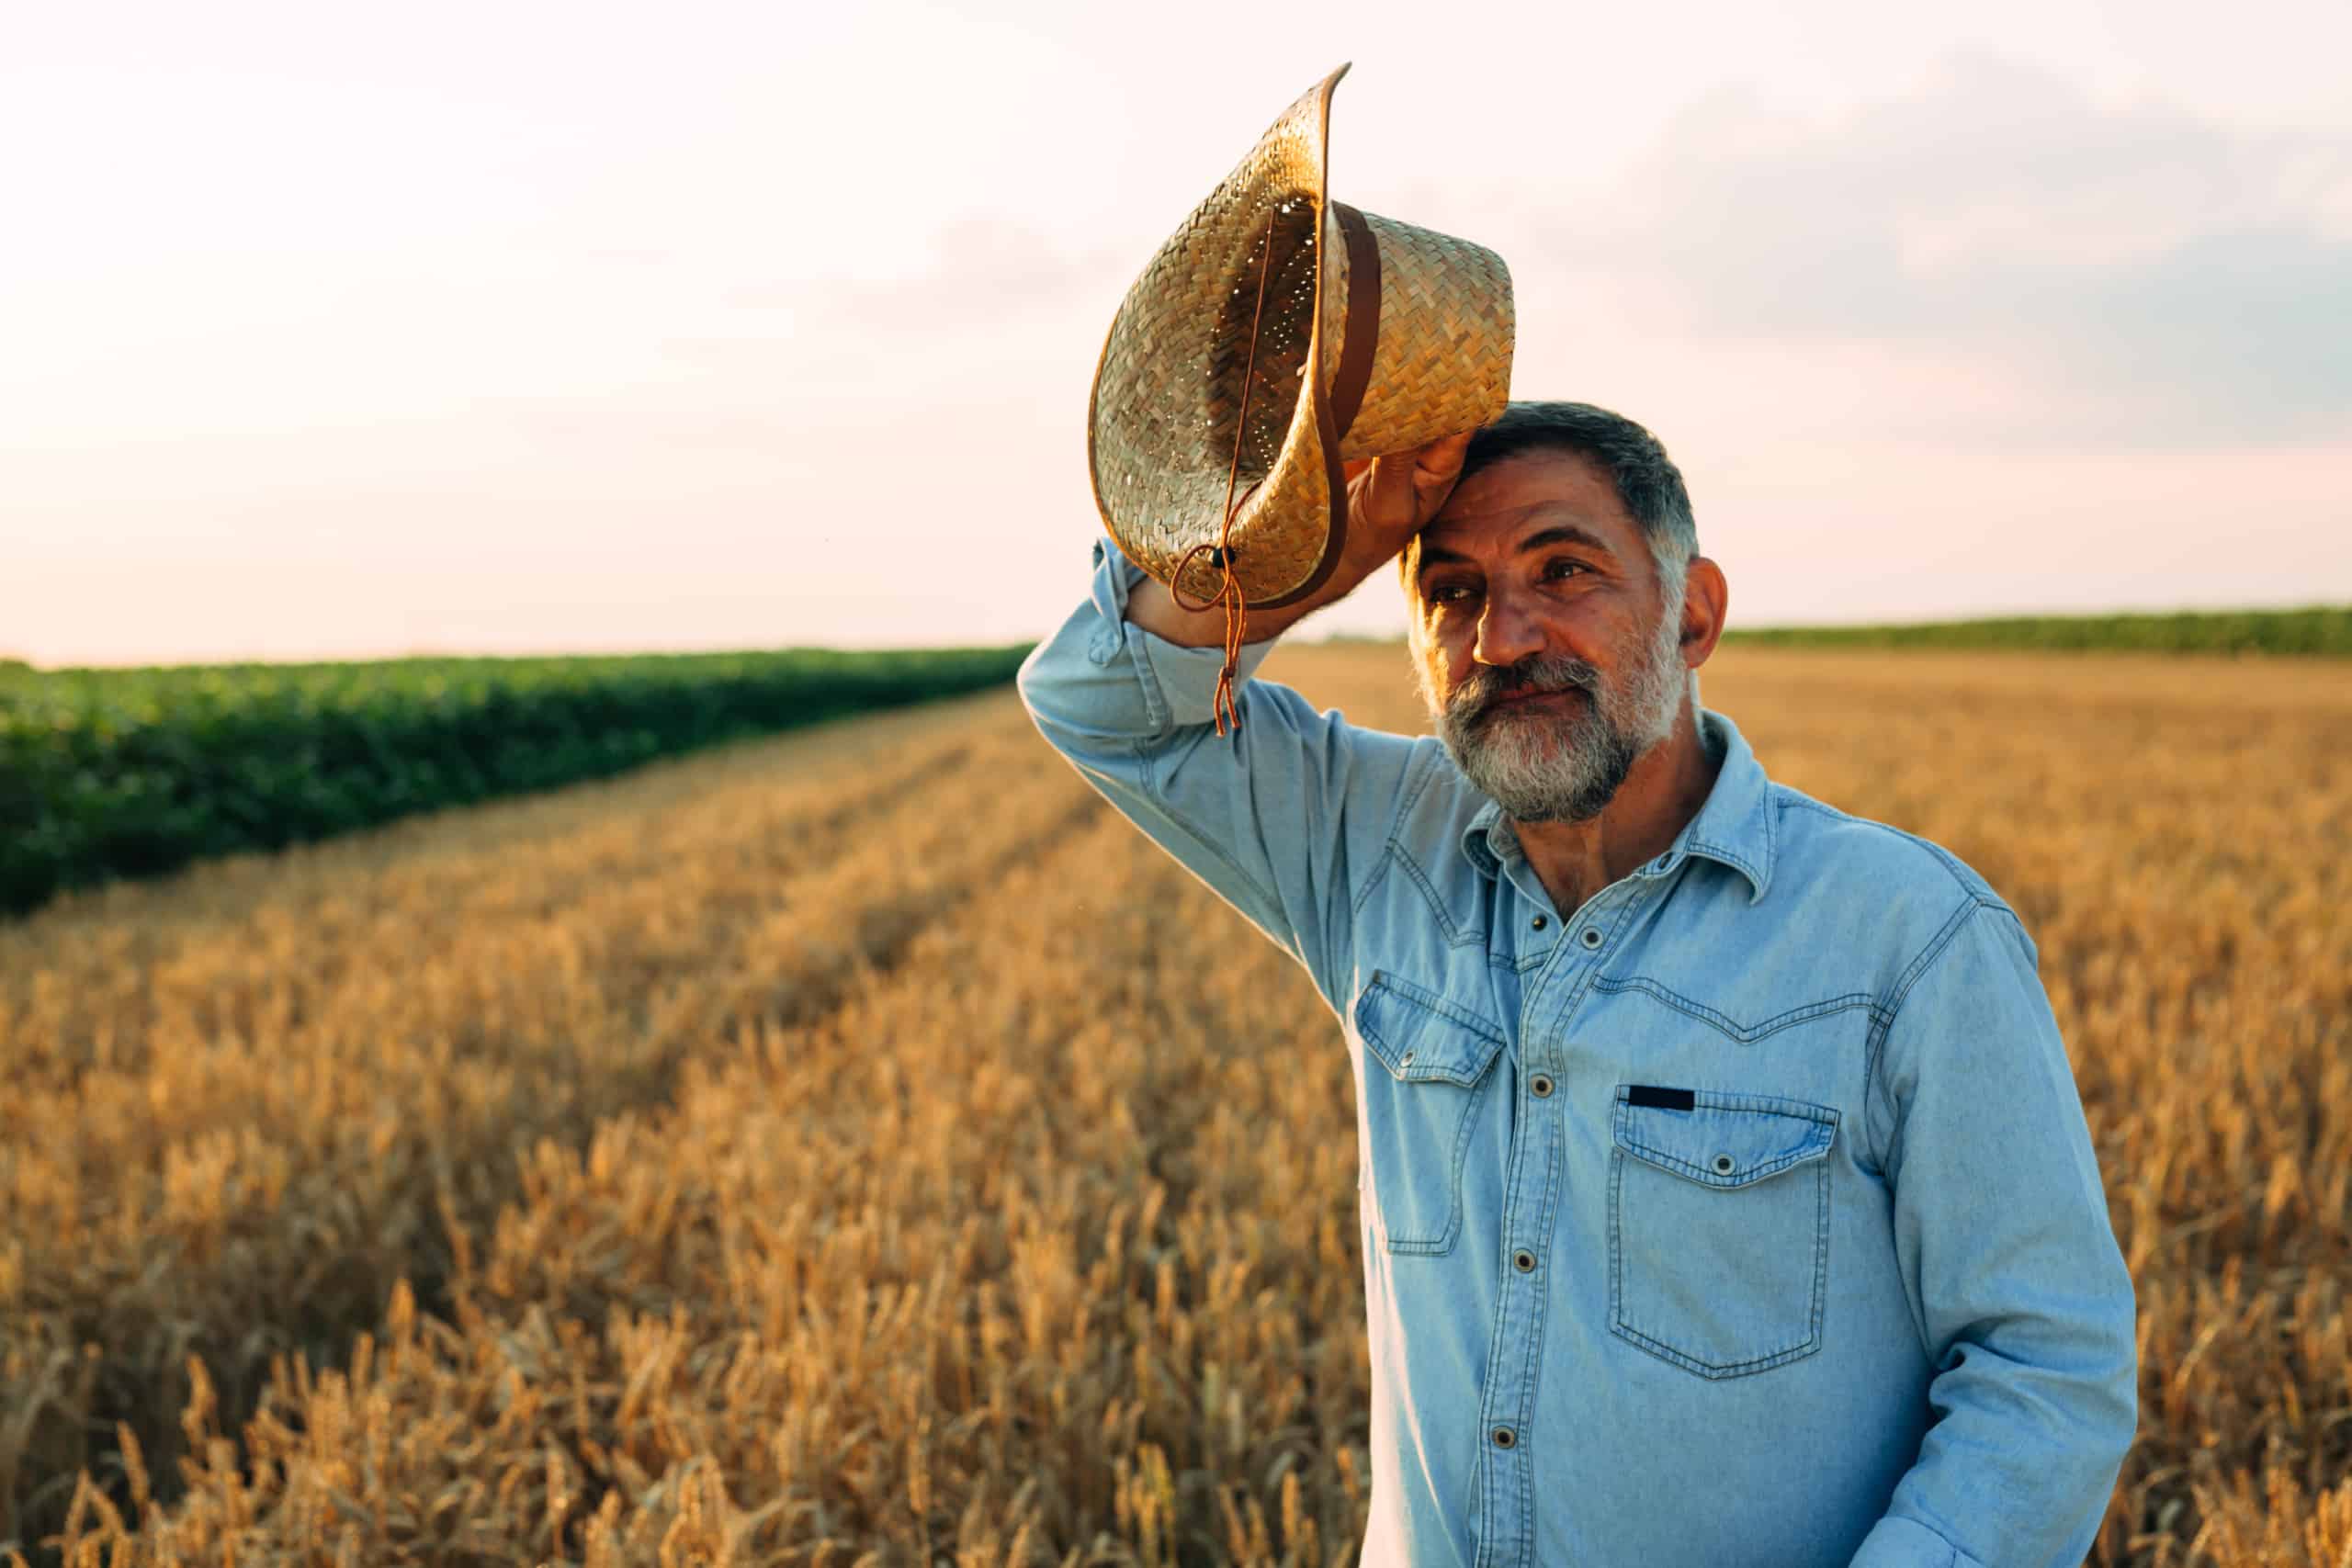 Man with hat in hand standing in a field of wheat